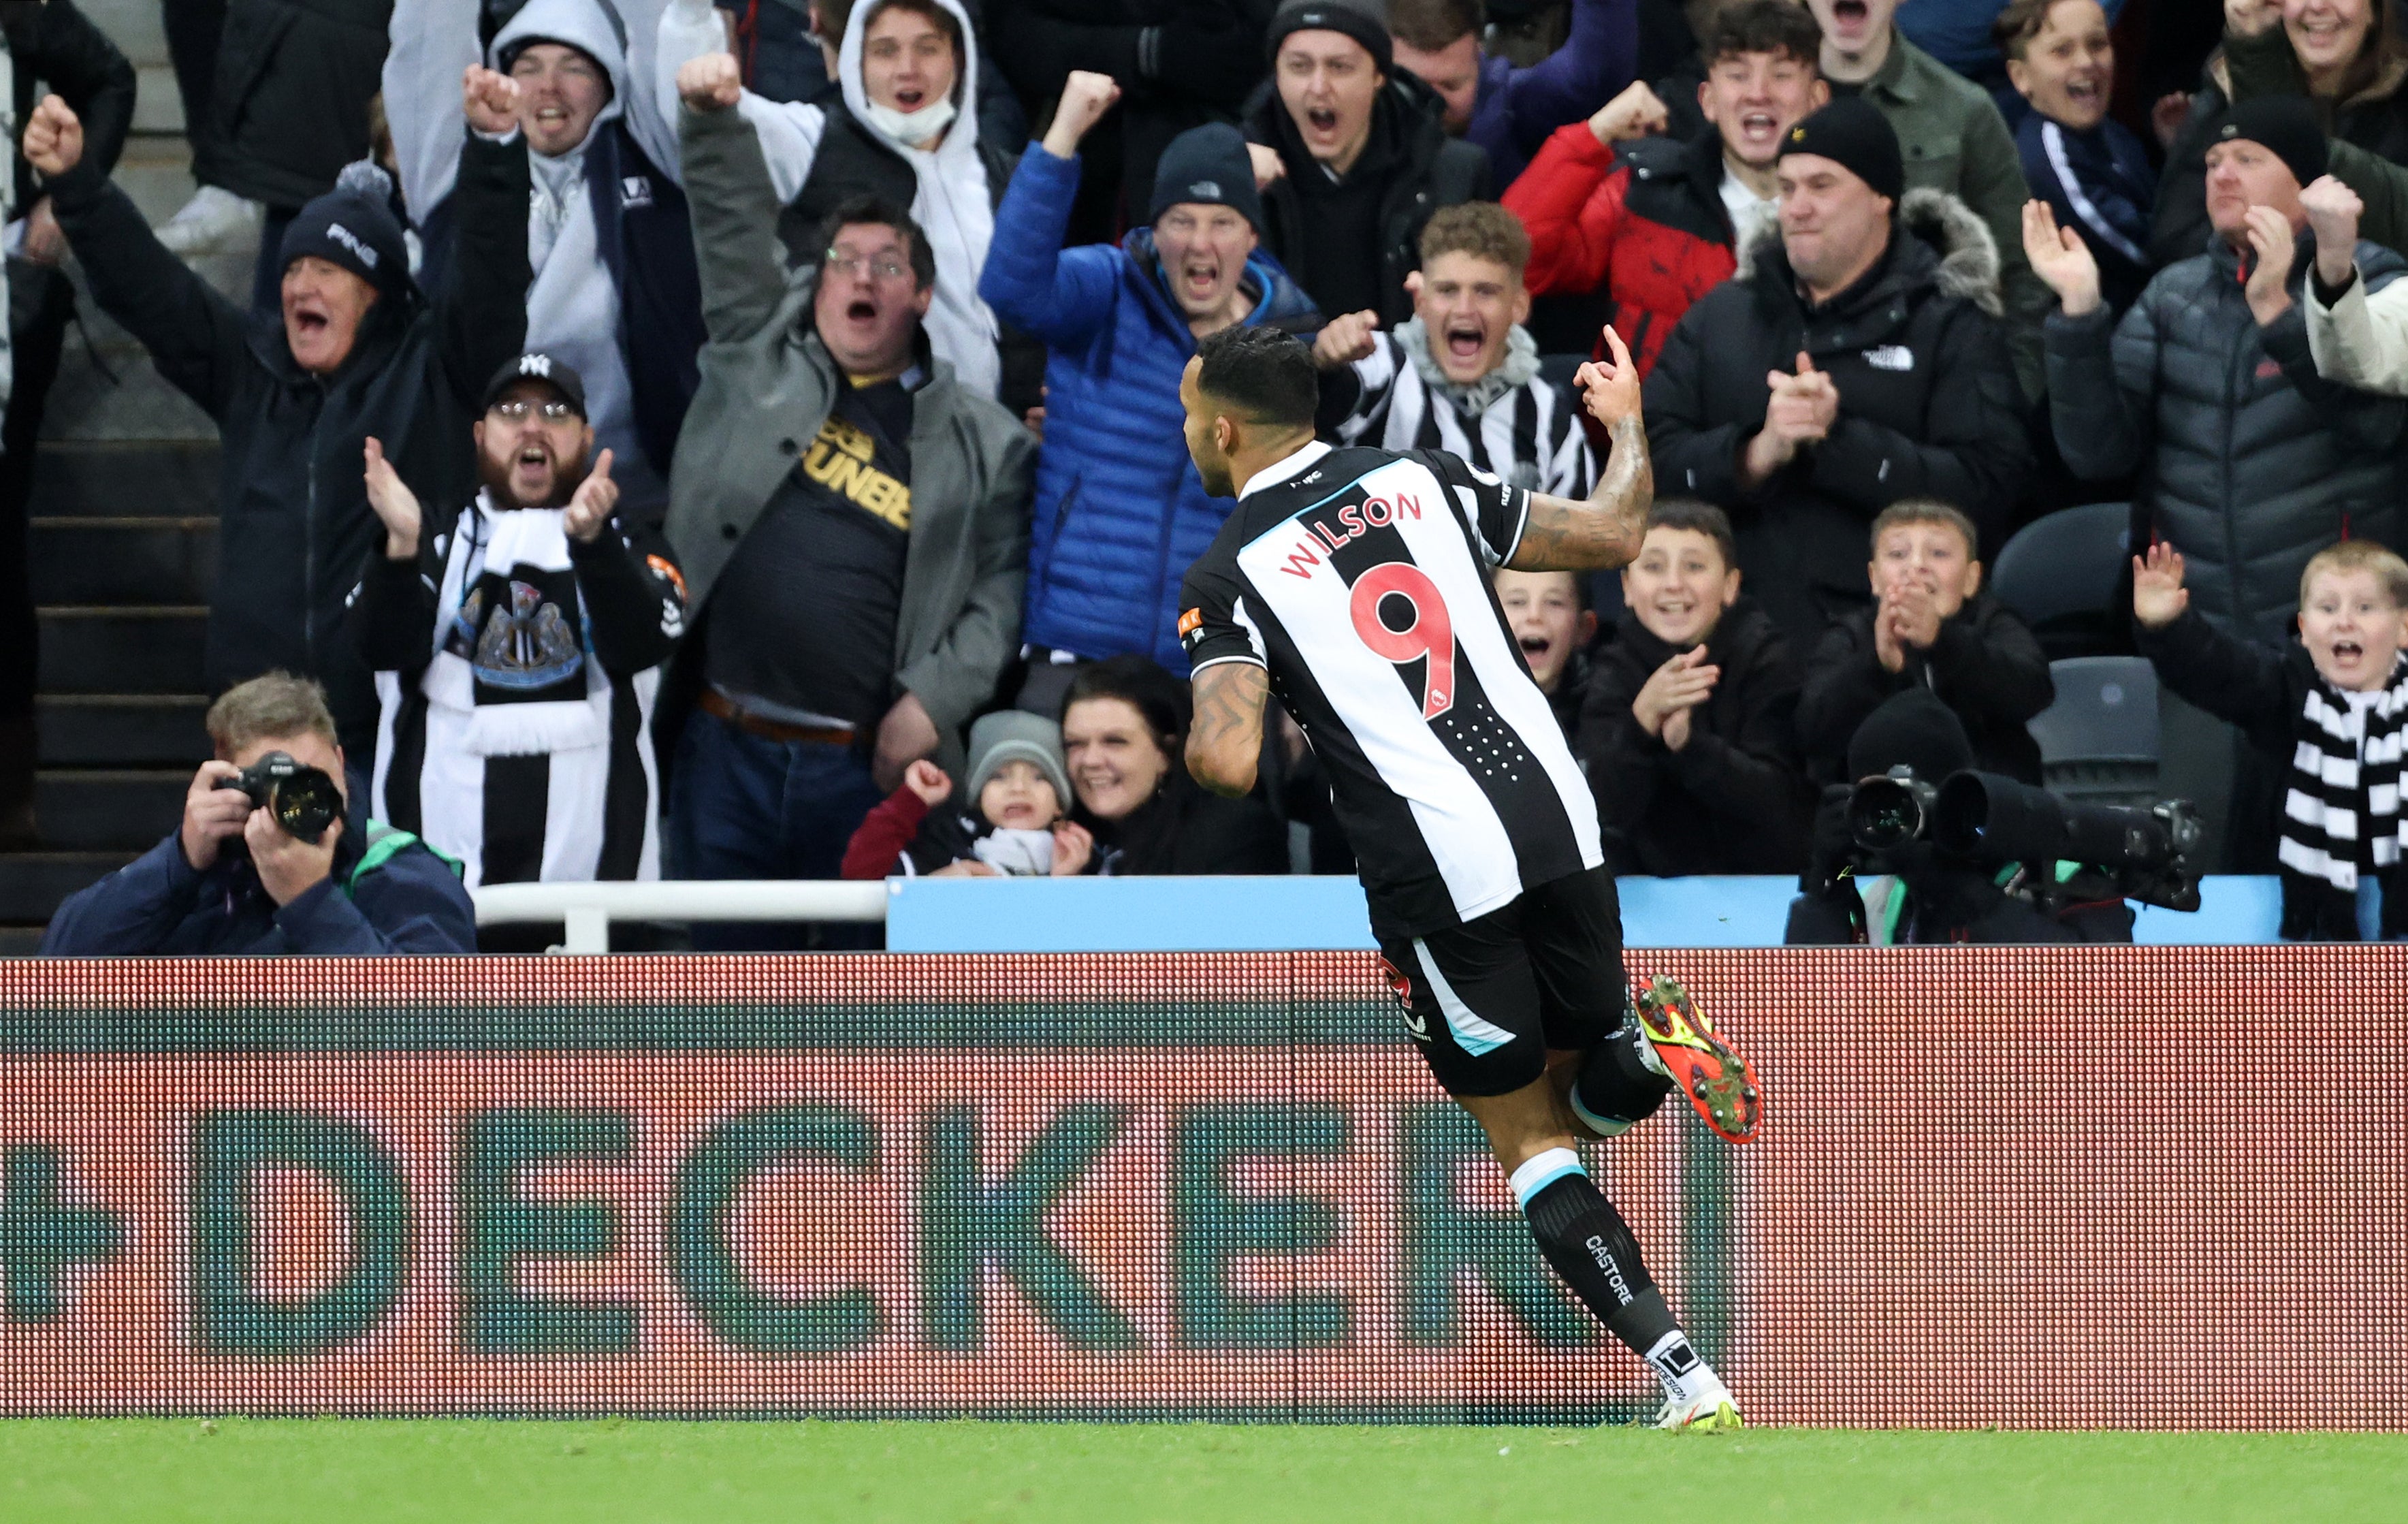 Callum Wilson goal sinks Burnley to earn Newcastle first Premier League win  | The Independent